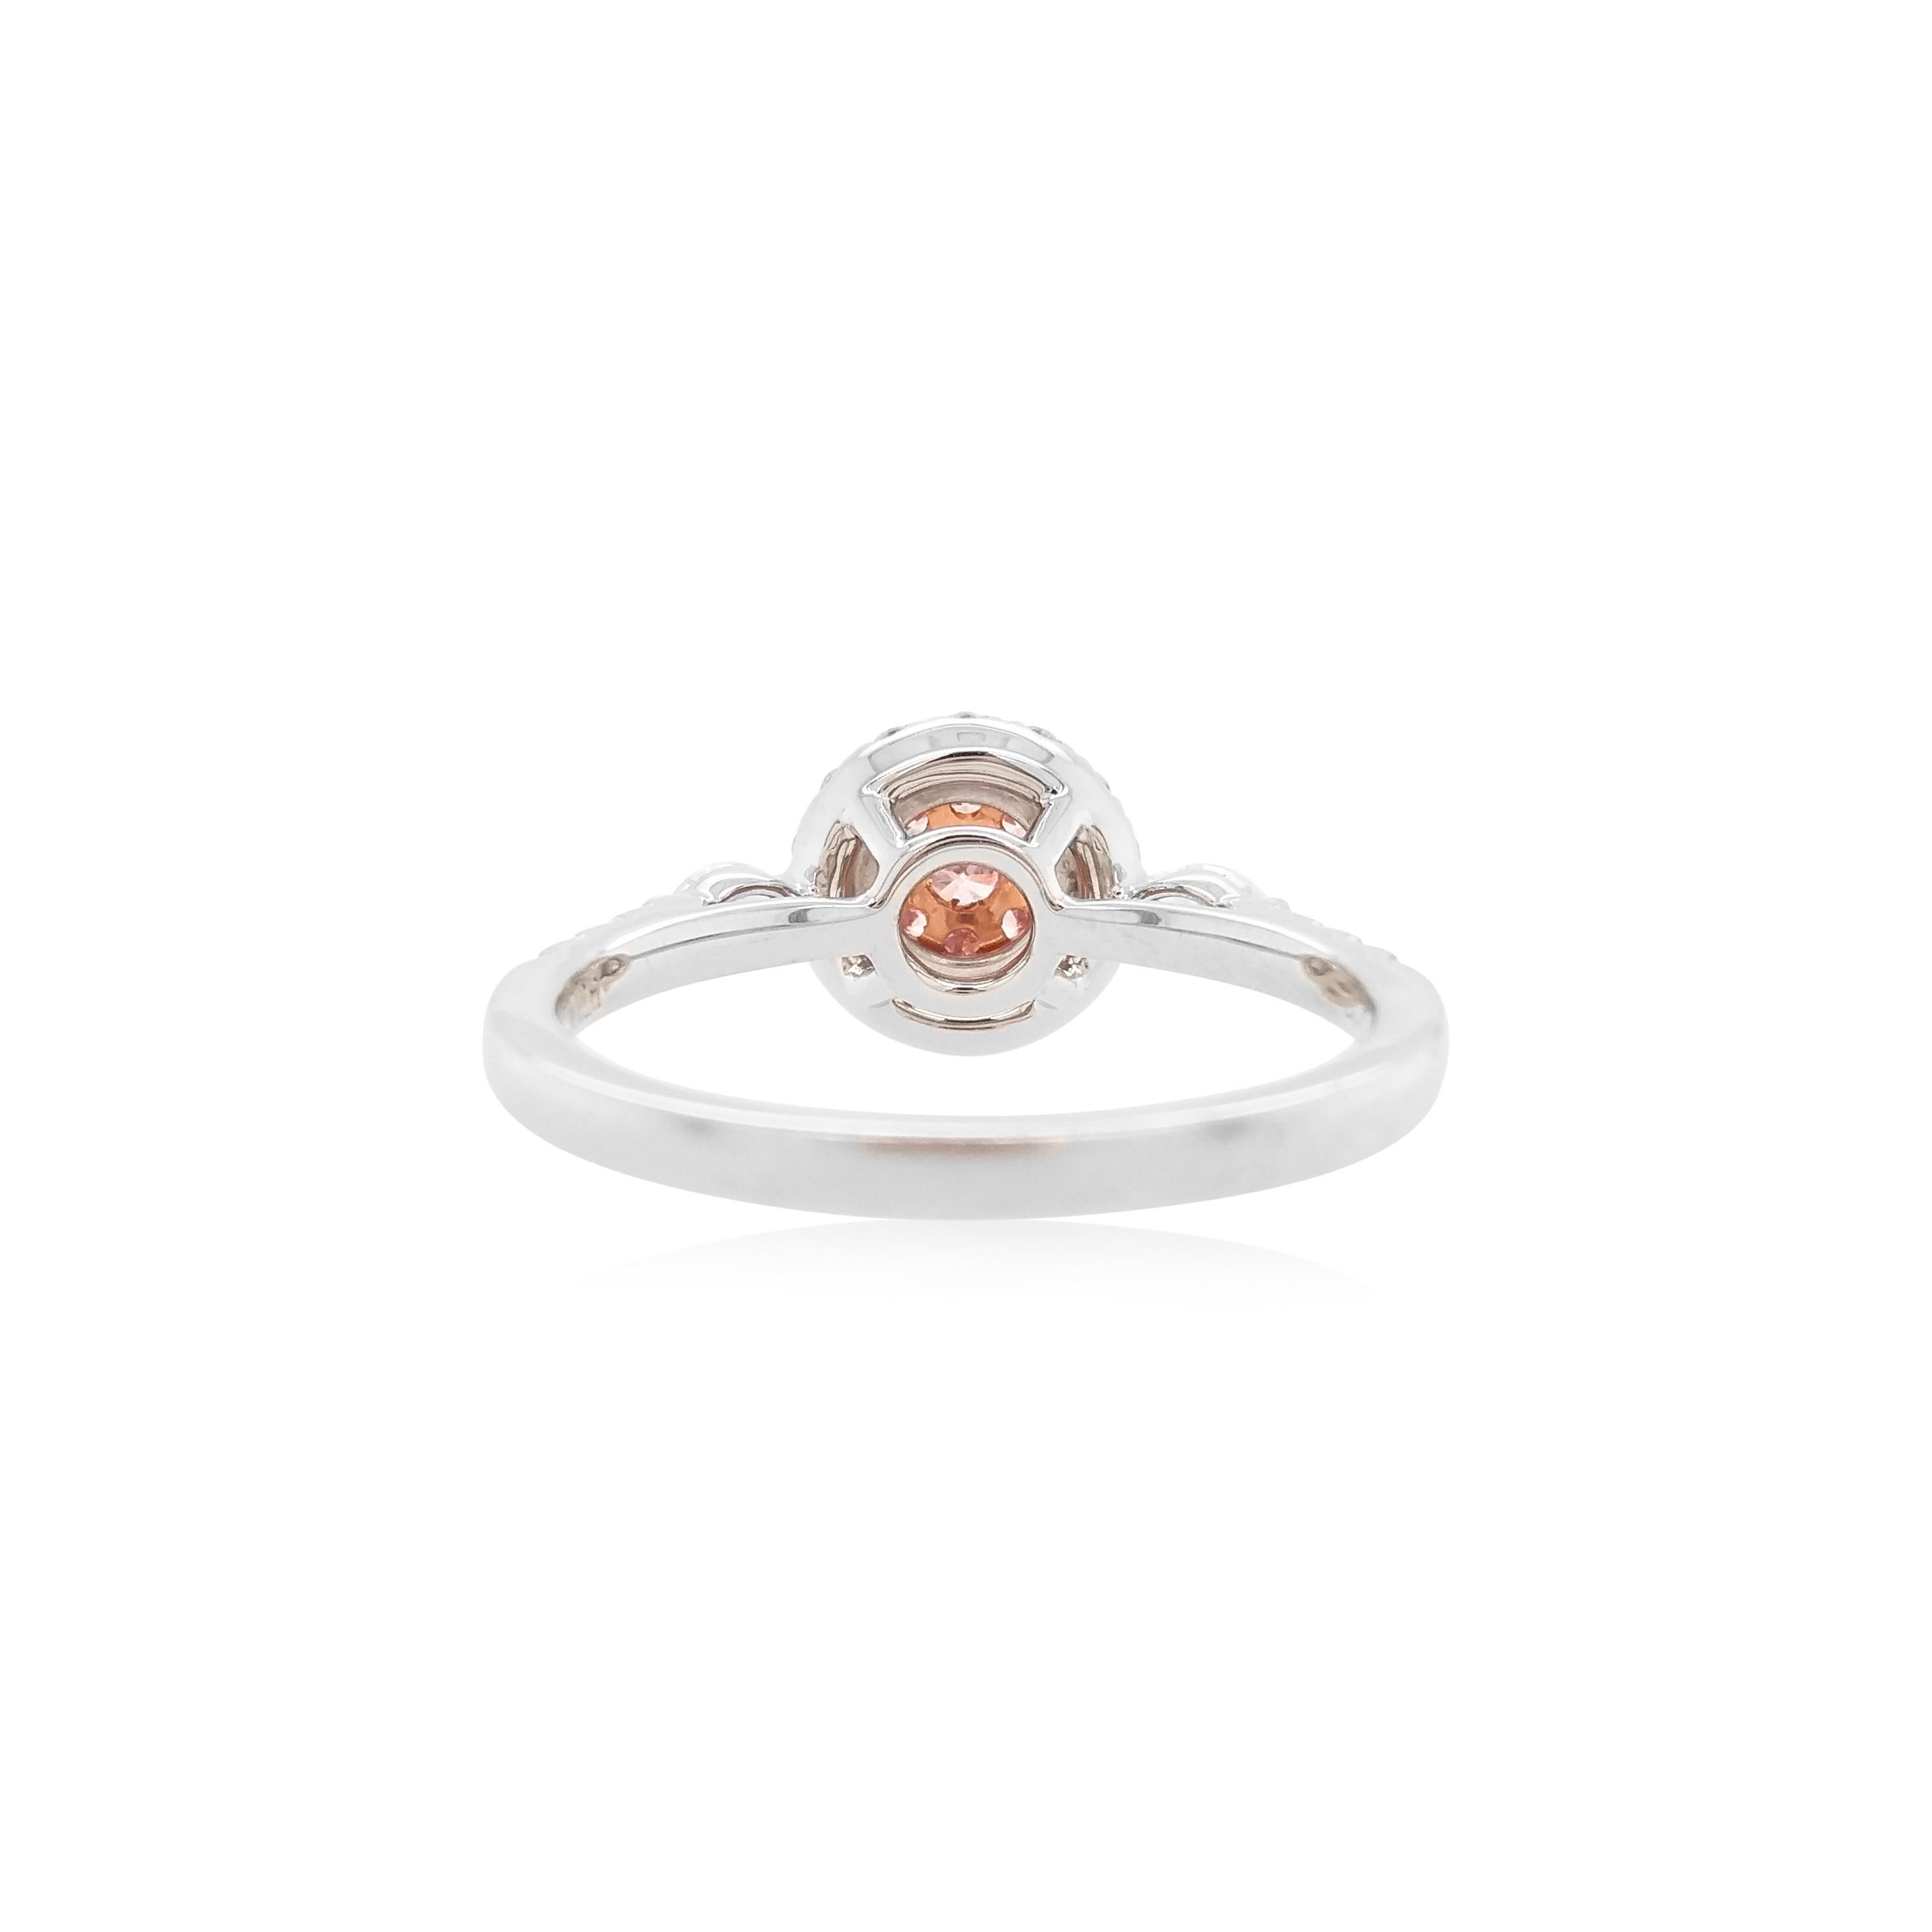 This contemporary platinum ring features exceptional quality Argyle Pink Diamonds at its forefront, surrounded by a halo of glistening white diamonds and a pair of marquise-shaped white diamonds on the shoulders. Set in platinum and 18 Karat Pink